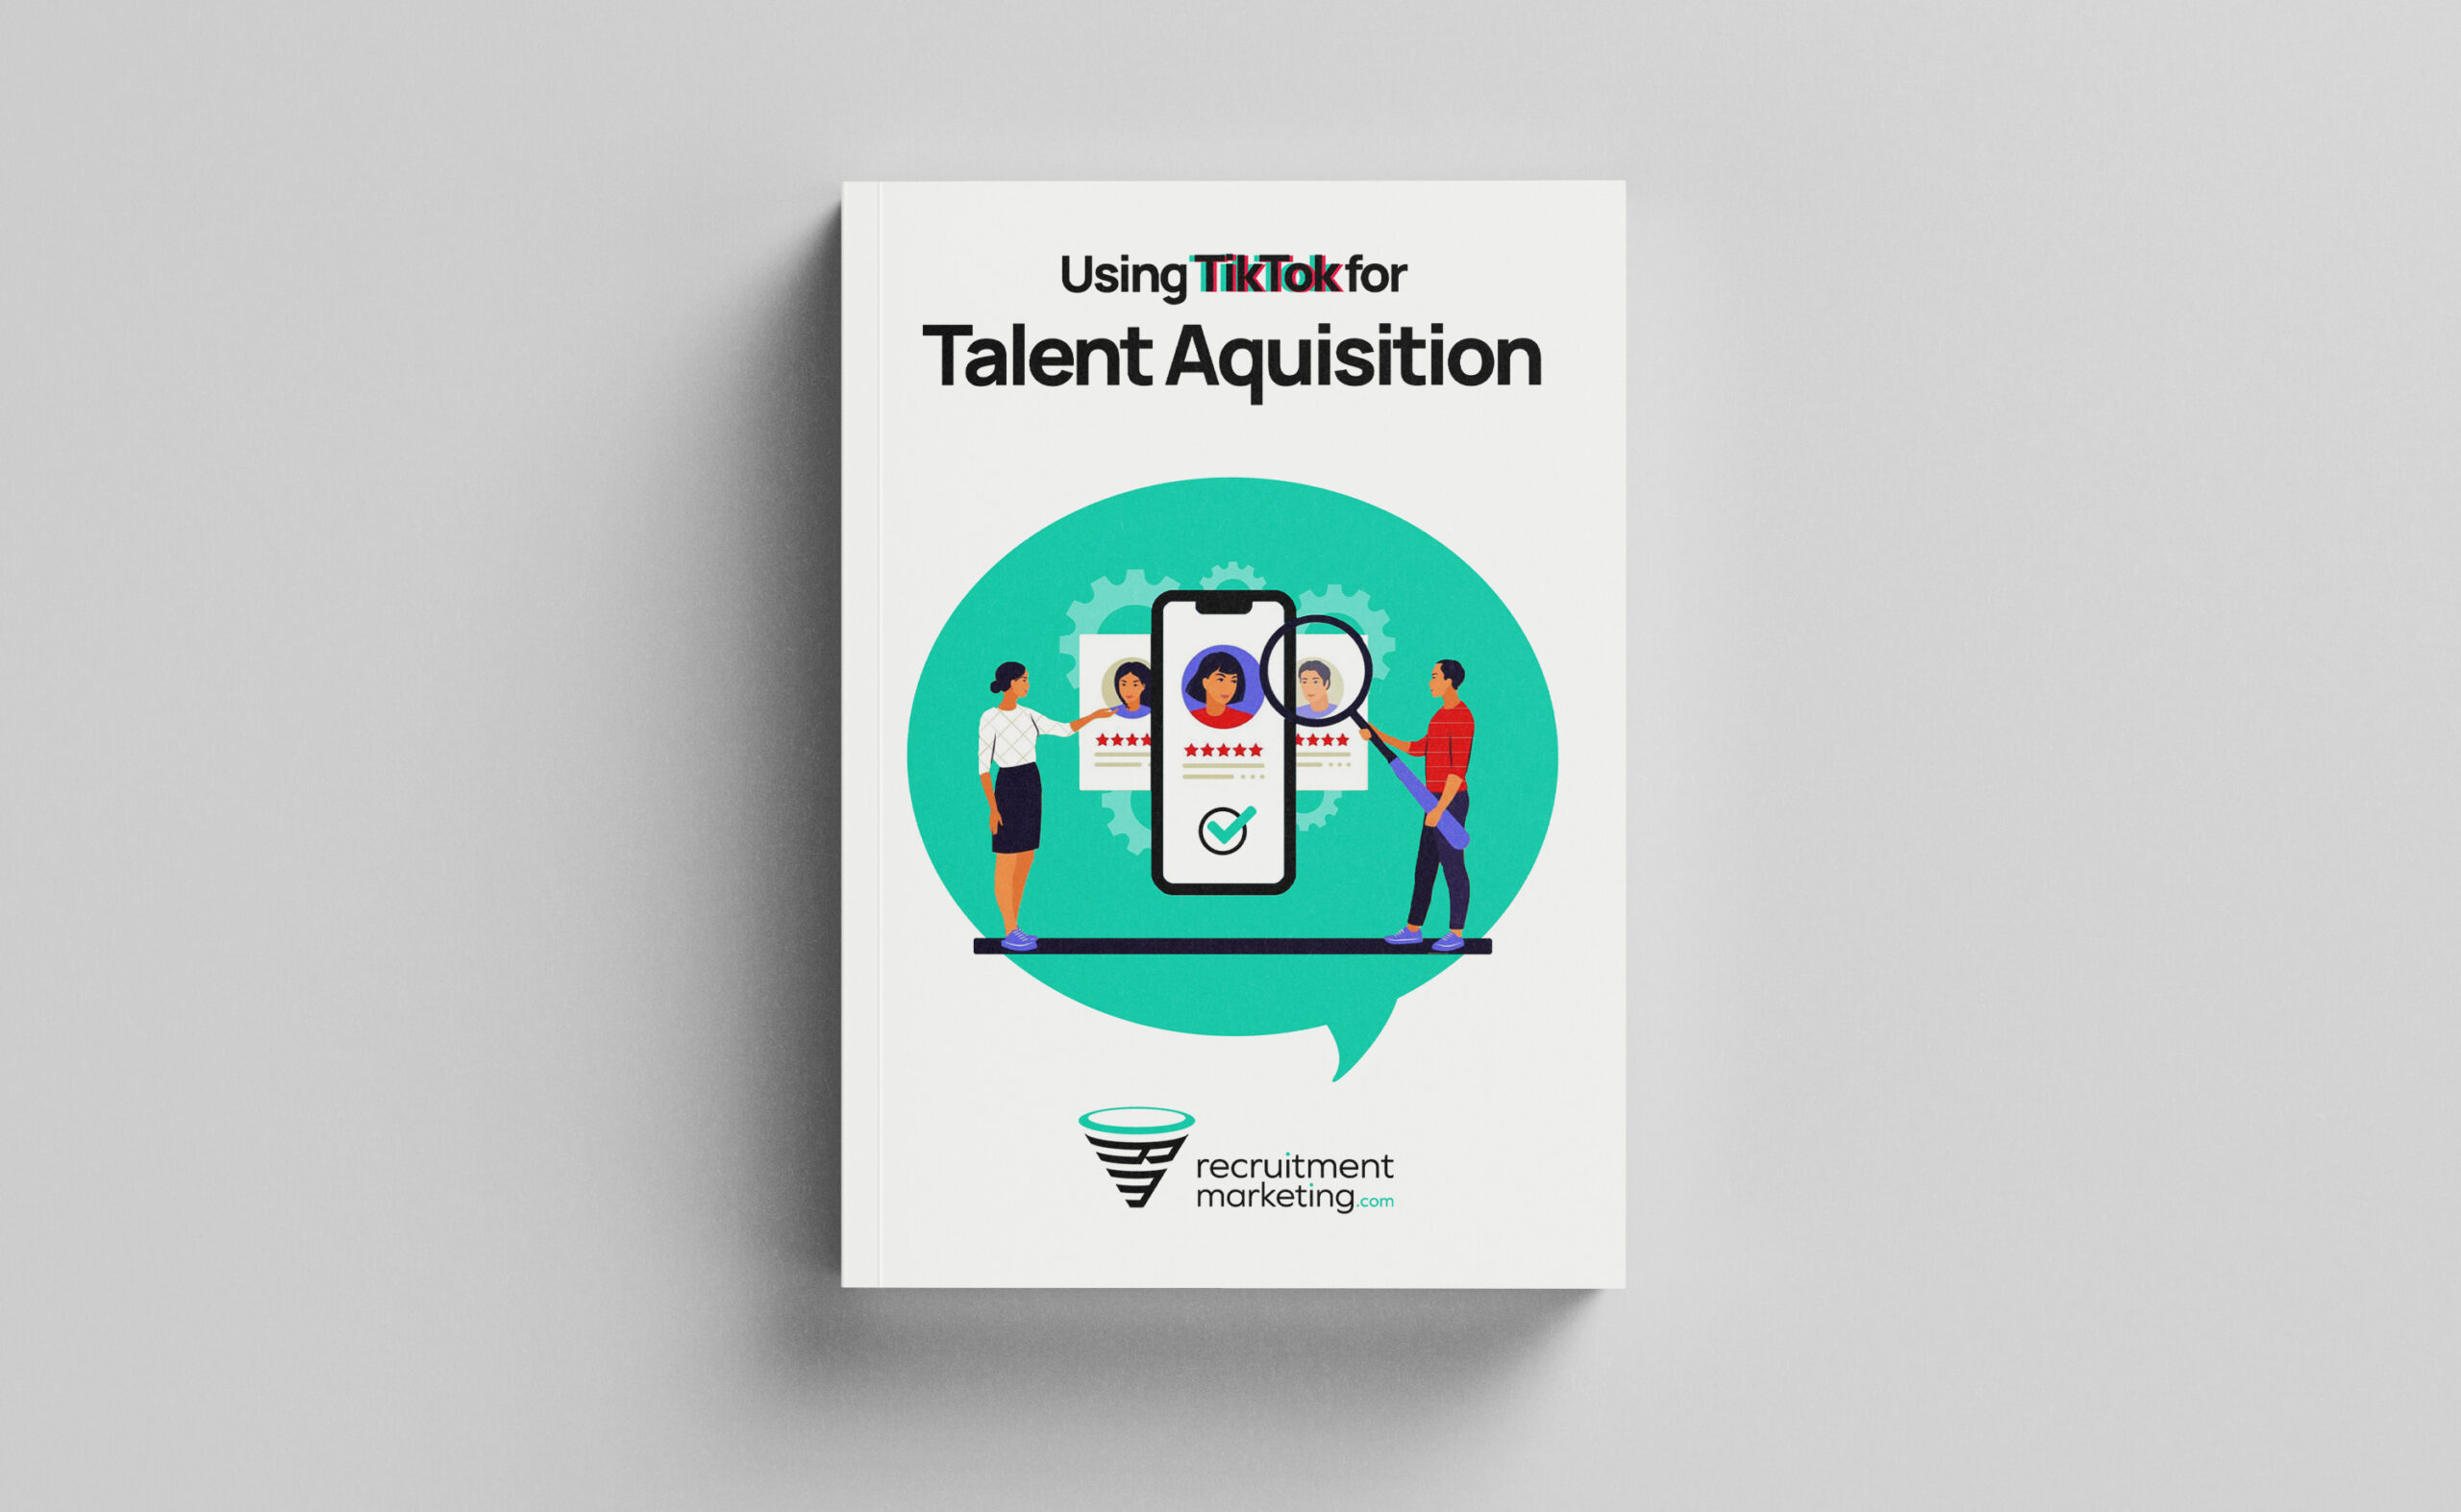 A digital mockup of a book cover for our ebook titled "Using TikTok for Talent Acquisition"